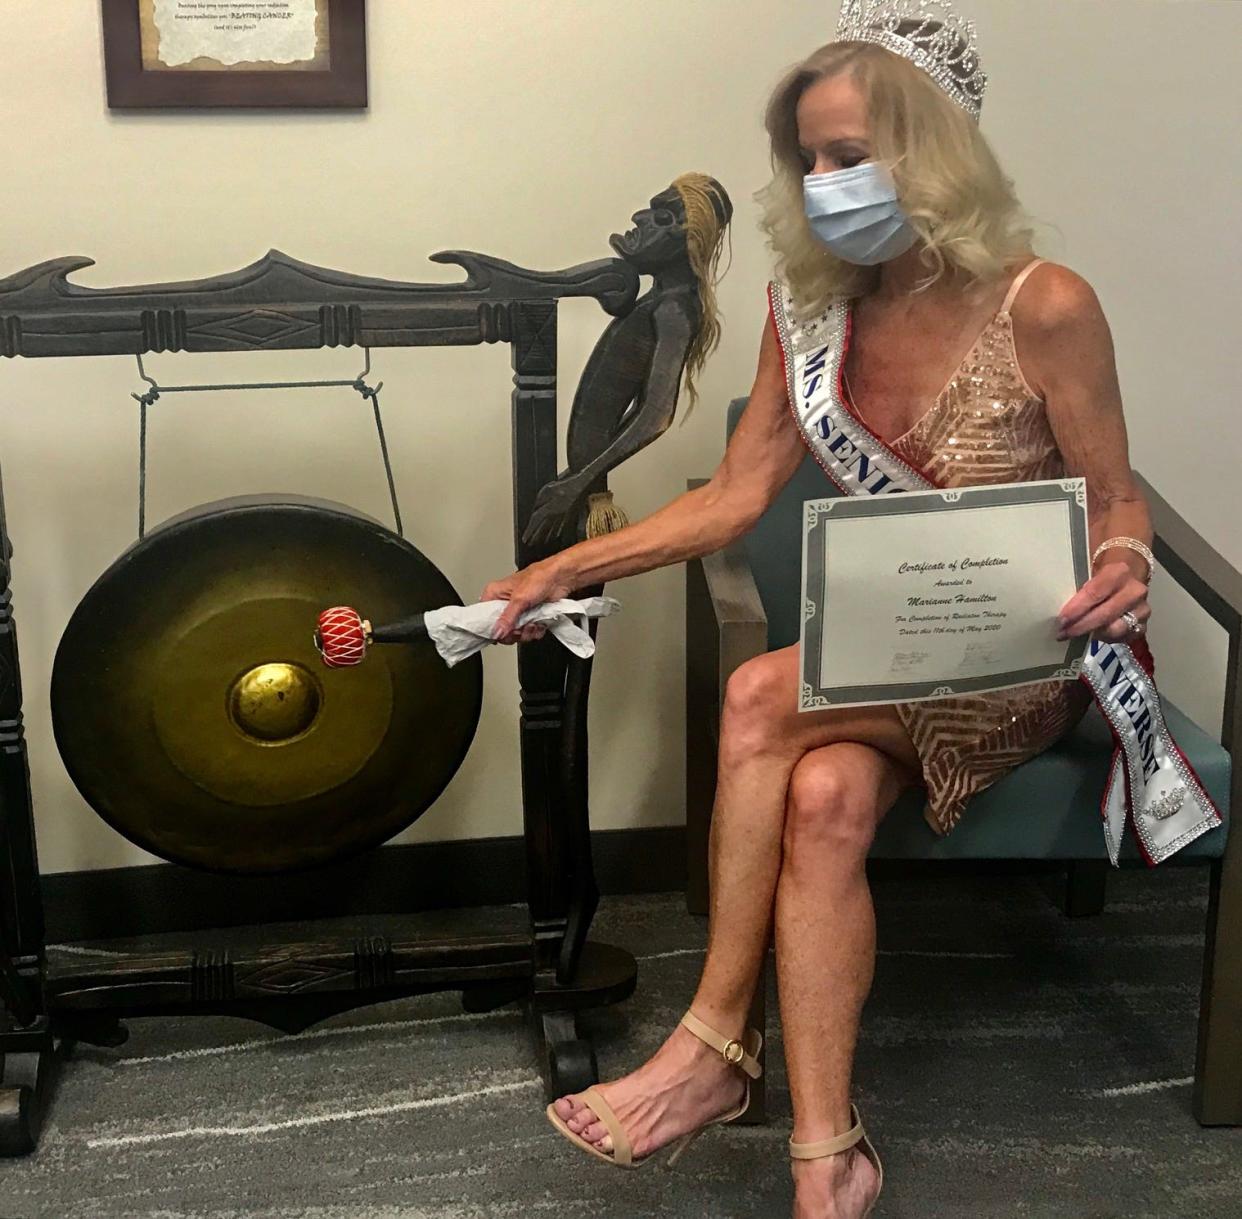 Marianne Hamilton, who recently won the Ms. Senior Universe title, celebrates by ringing the ‘last chemo treatment’ gong at the Intermountain Cancer Center in St. George on May 11.